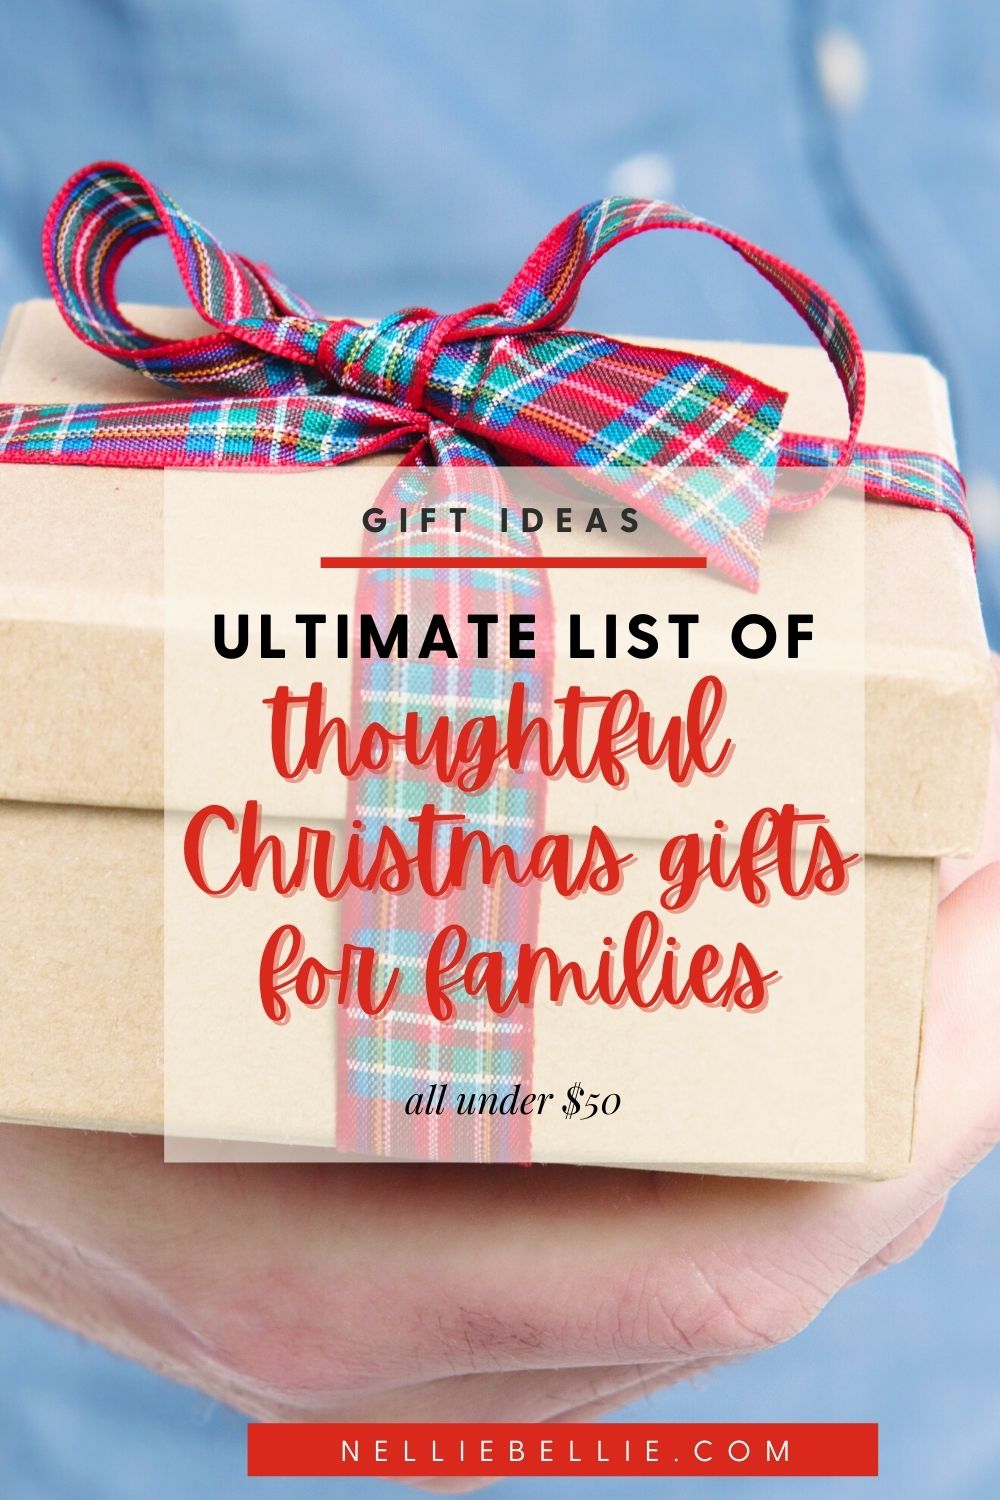 25+ Christmas Gift Ideas for family & friends (under 50) ⋆ NellieBellie